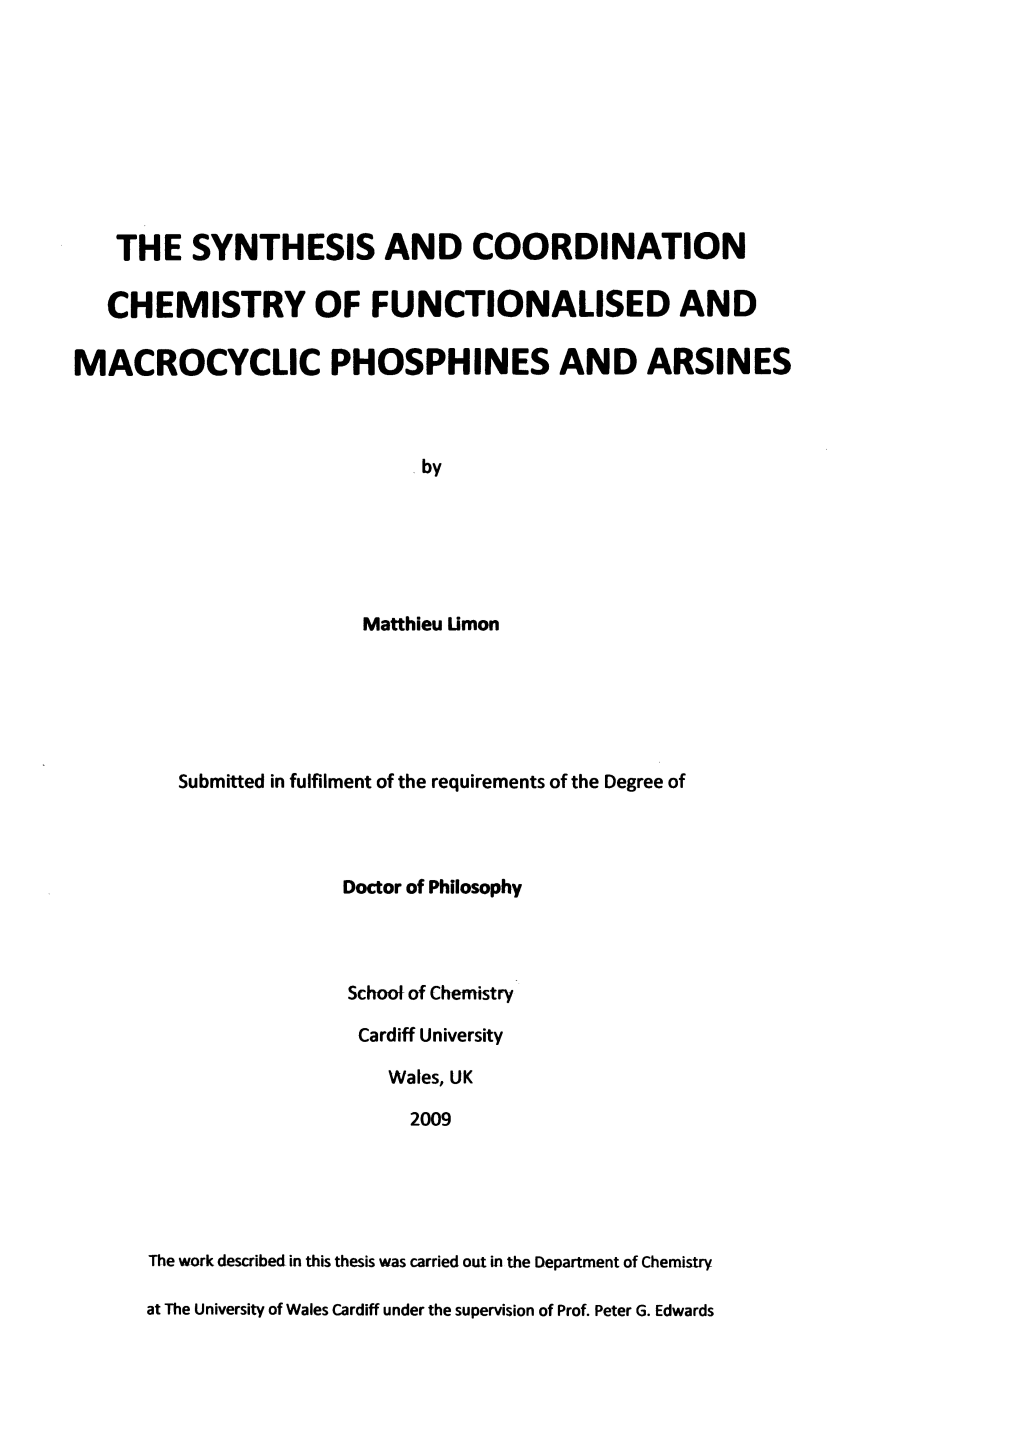 The Synthesis and Coordination Chemistry of Functionalised and Macrocyclic Phosphines and Arsines